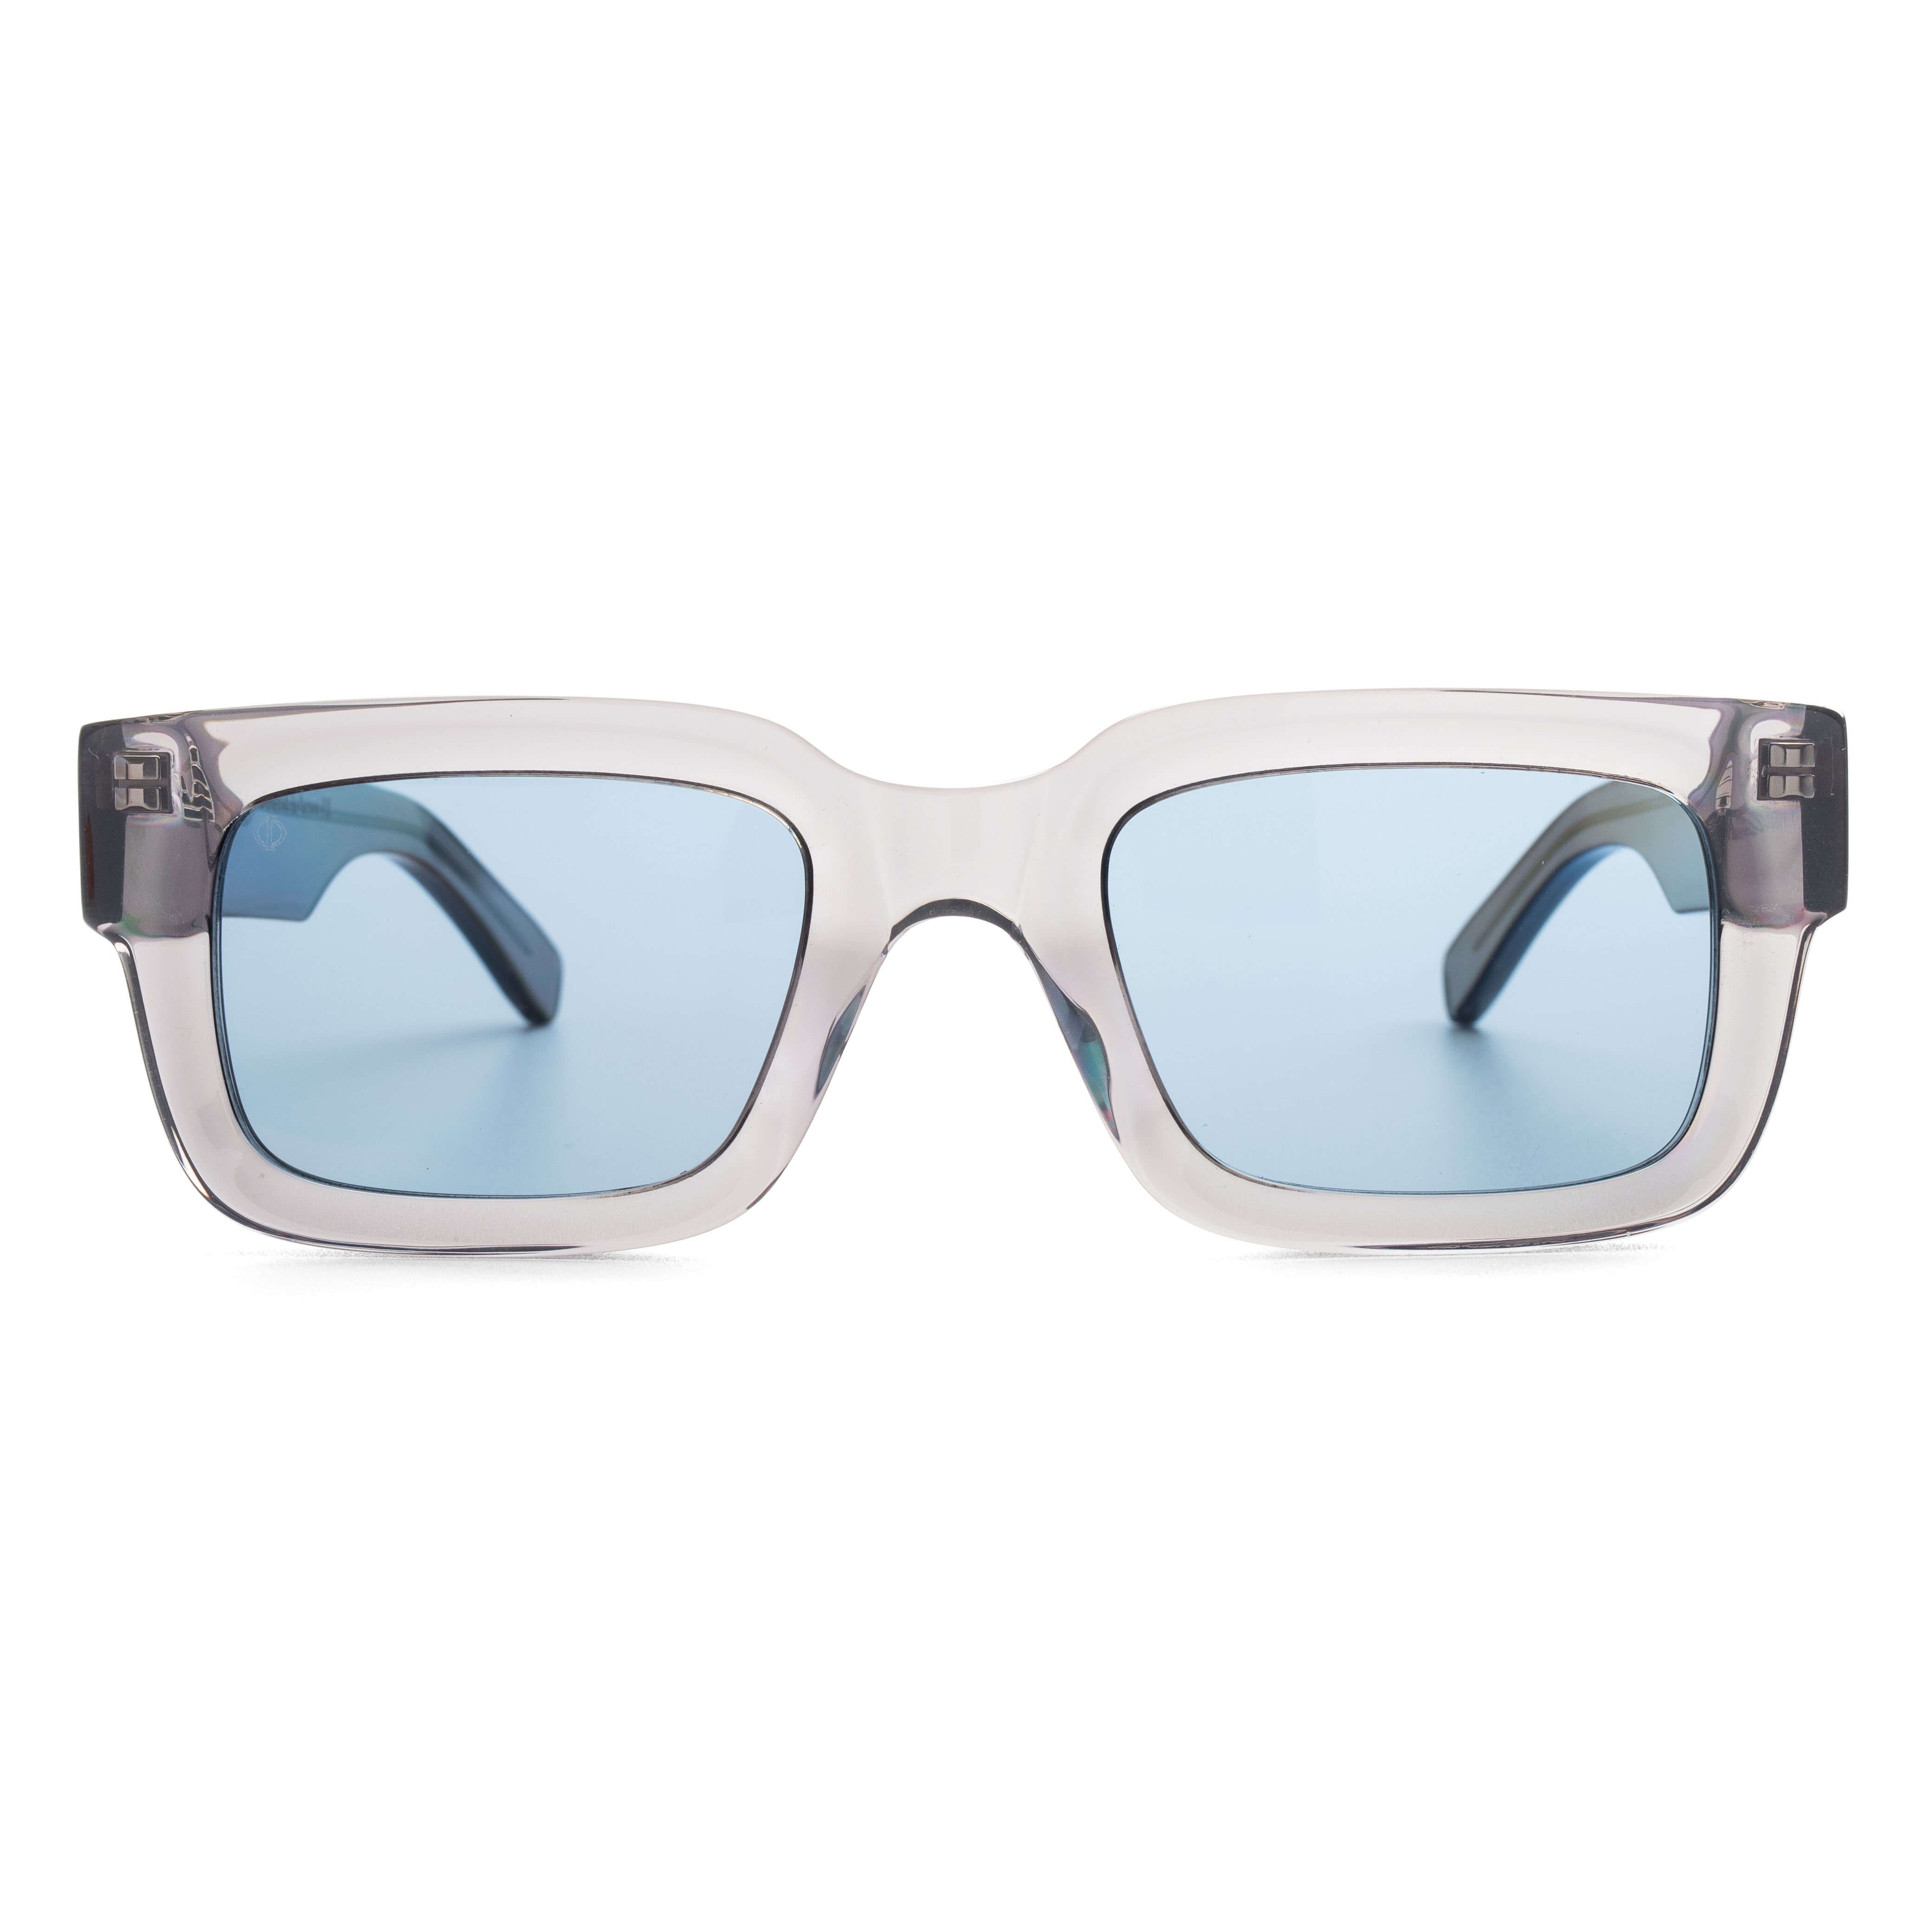 CRETE IN CRYSTAL GREY WITH KYANO BLUE LENSES